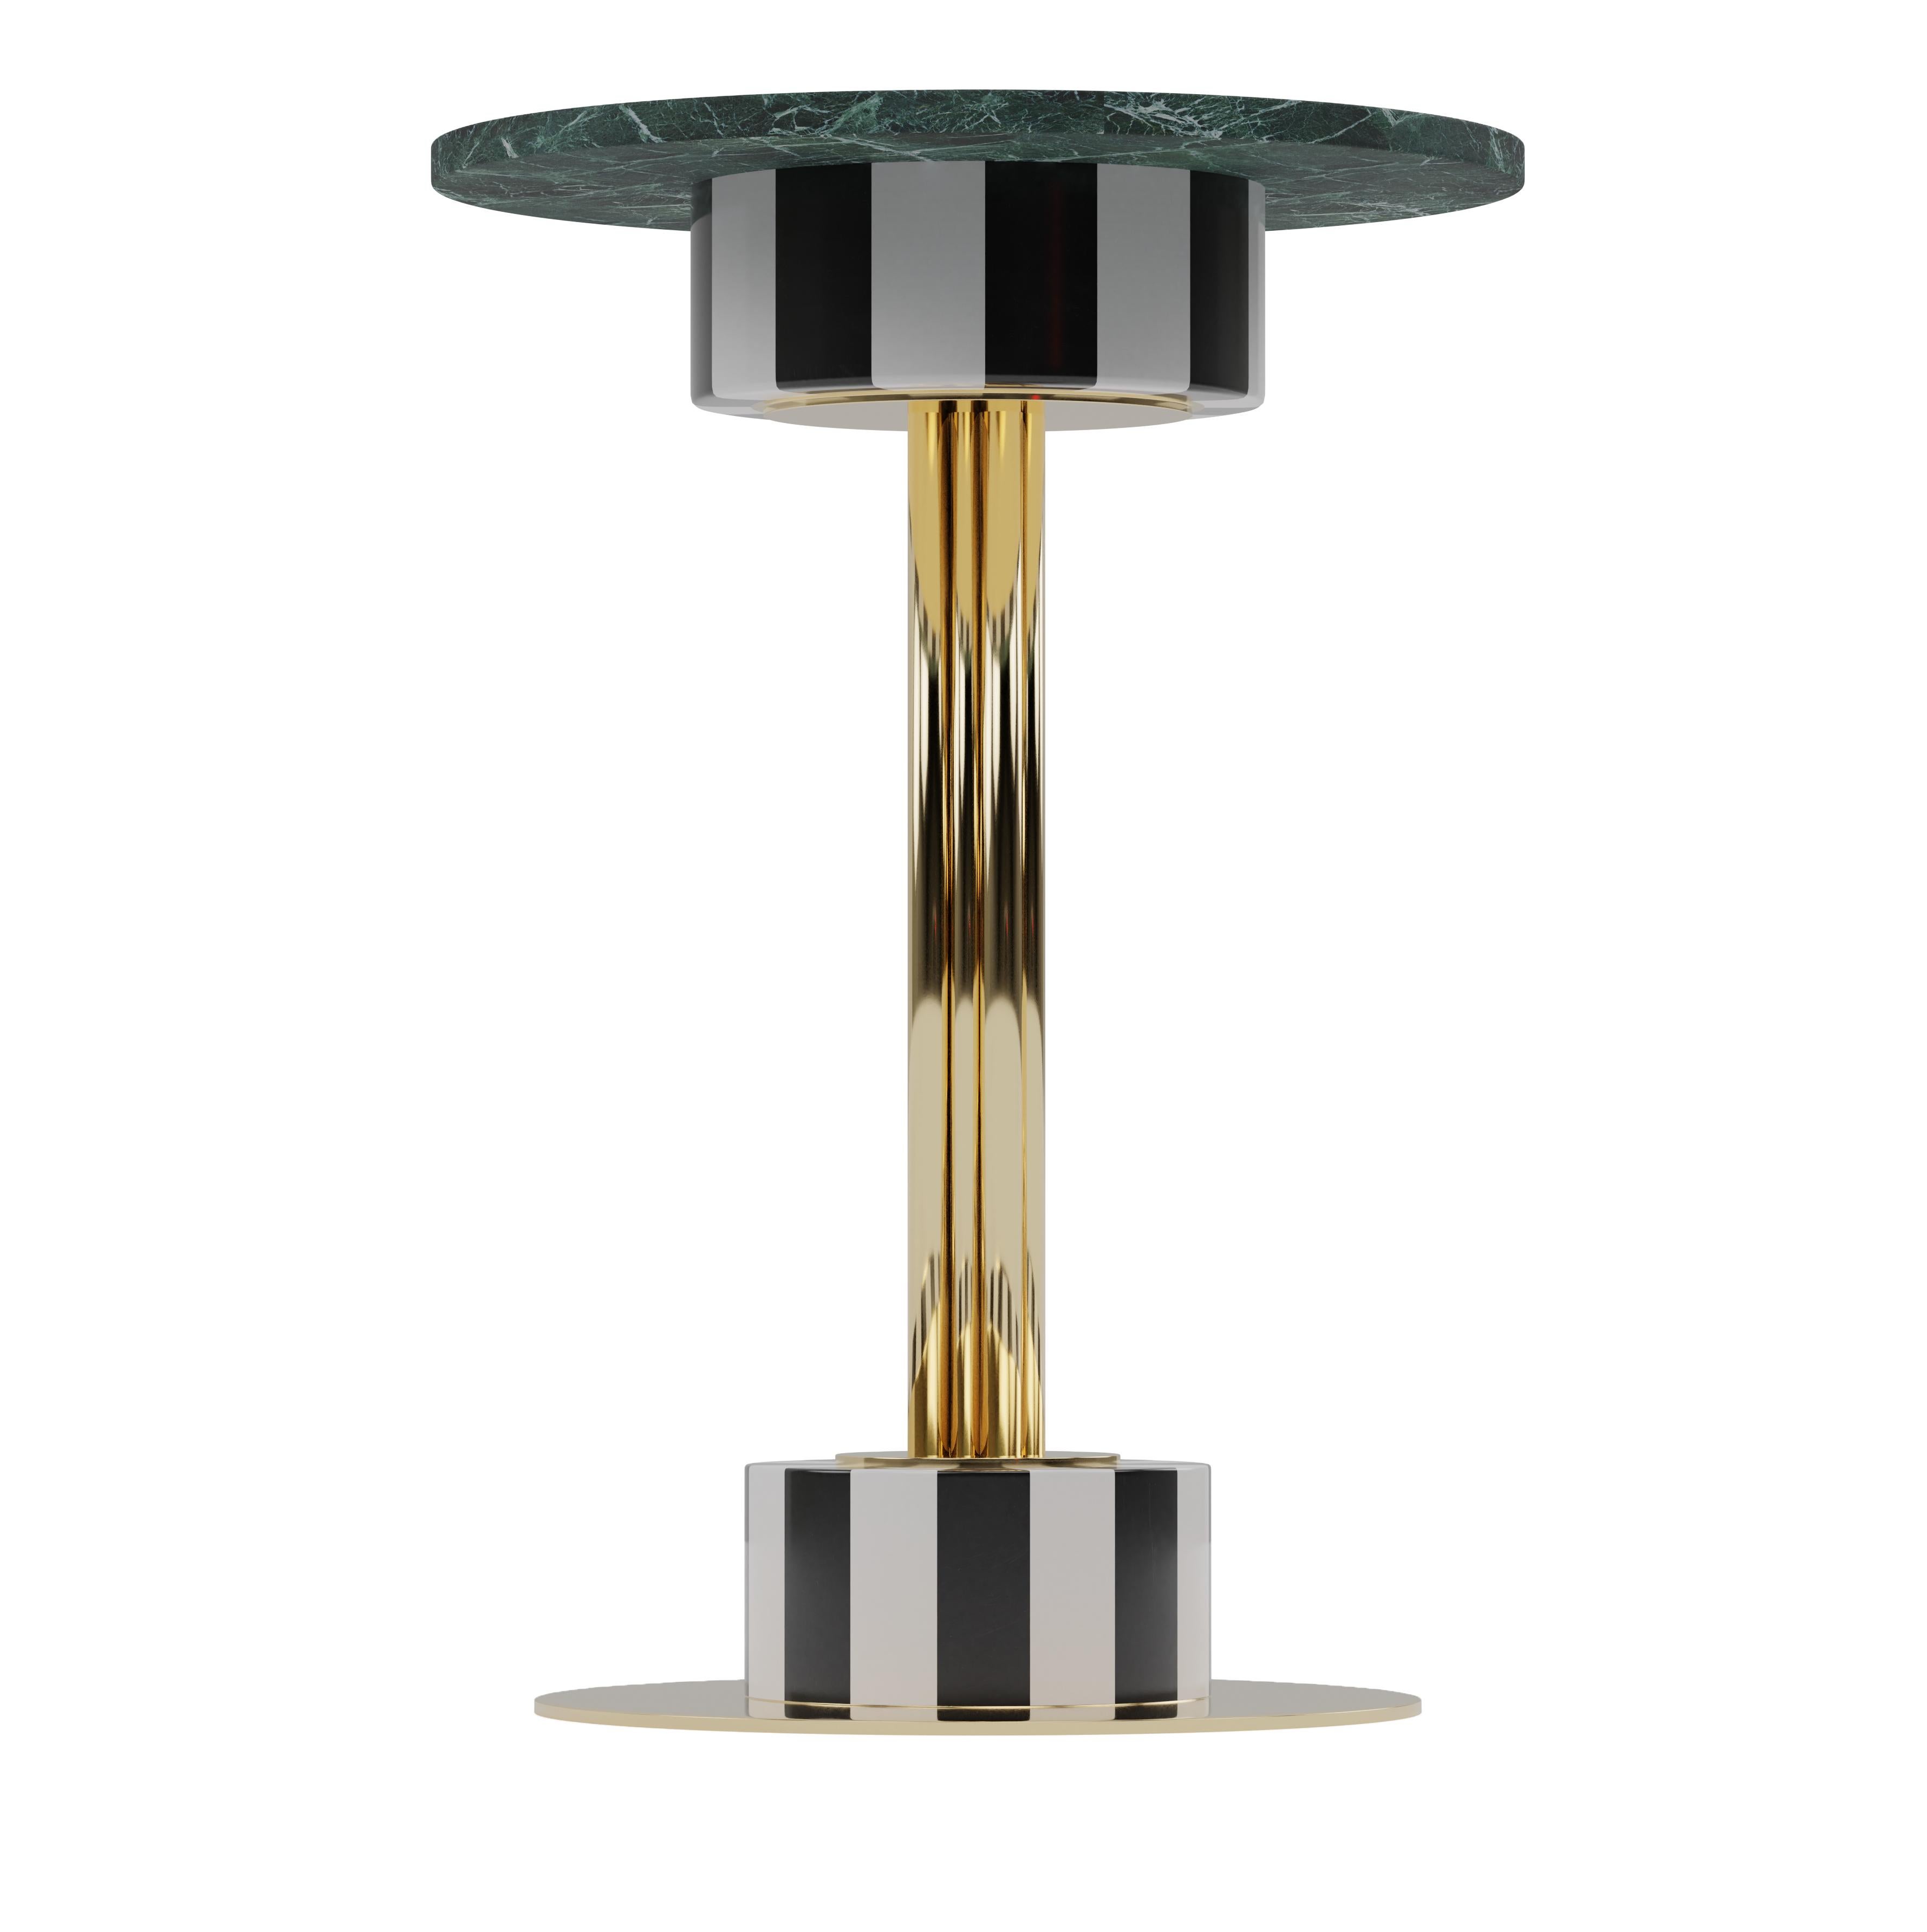 Julia marble table, royal stranger

Dimensions:
width 75cm, height 105 cm, depth 75 cm

Inspired by the femininity and using bold and vibrant color schemes, this collection is meant to be positive and happy, celebrating the inner beauty,